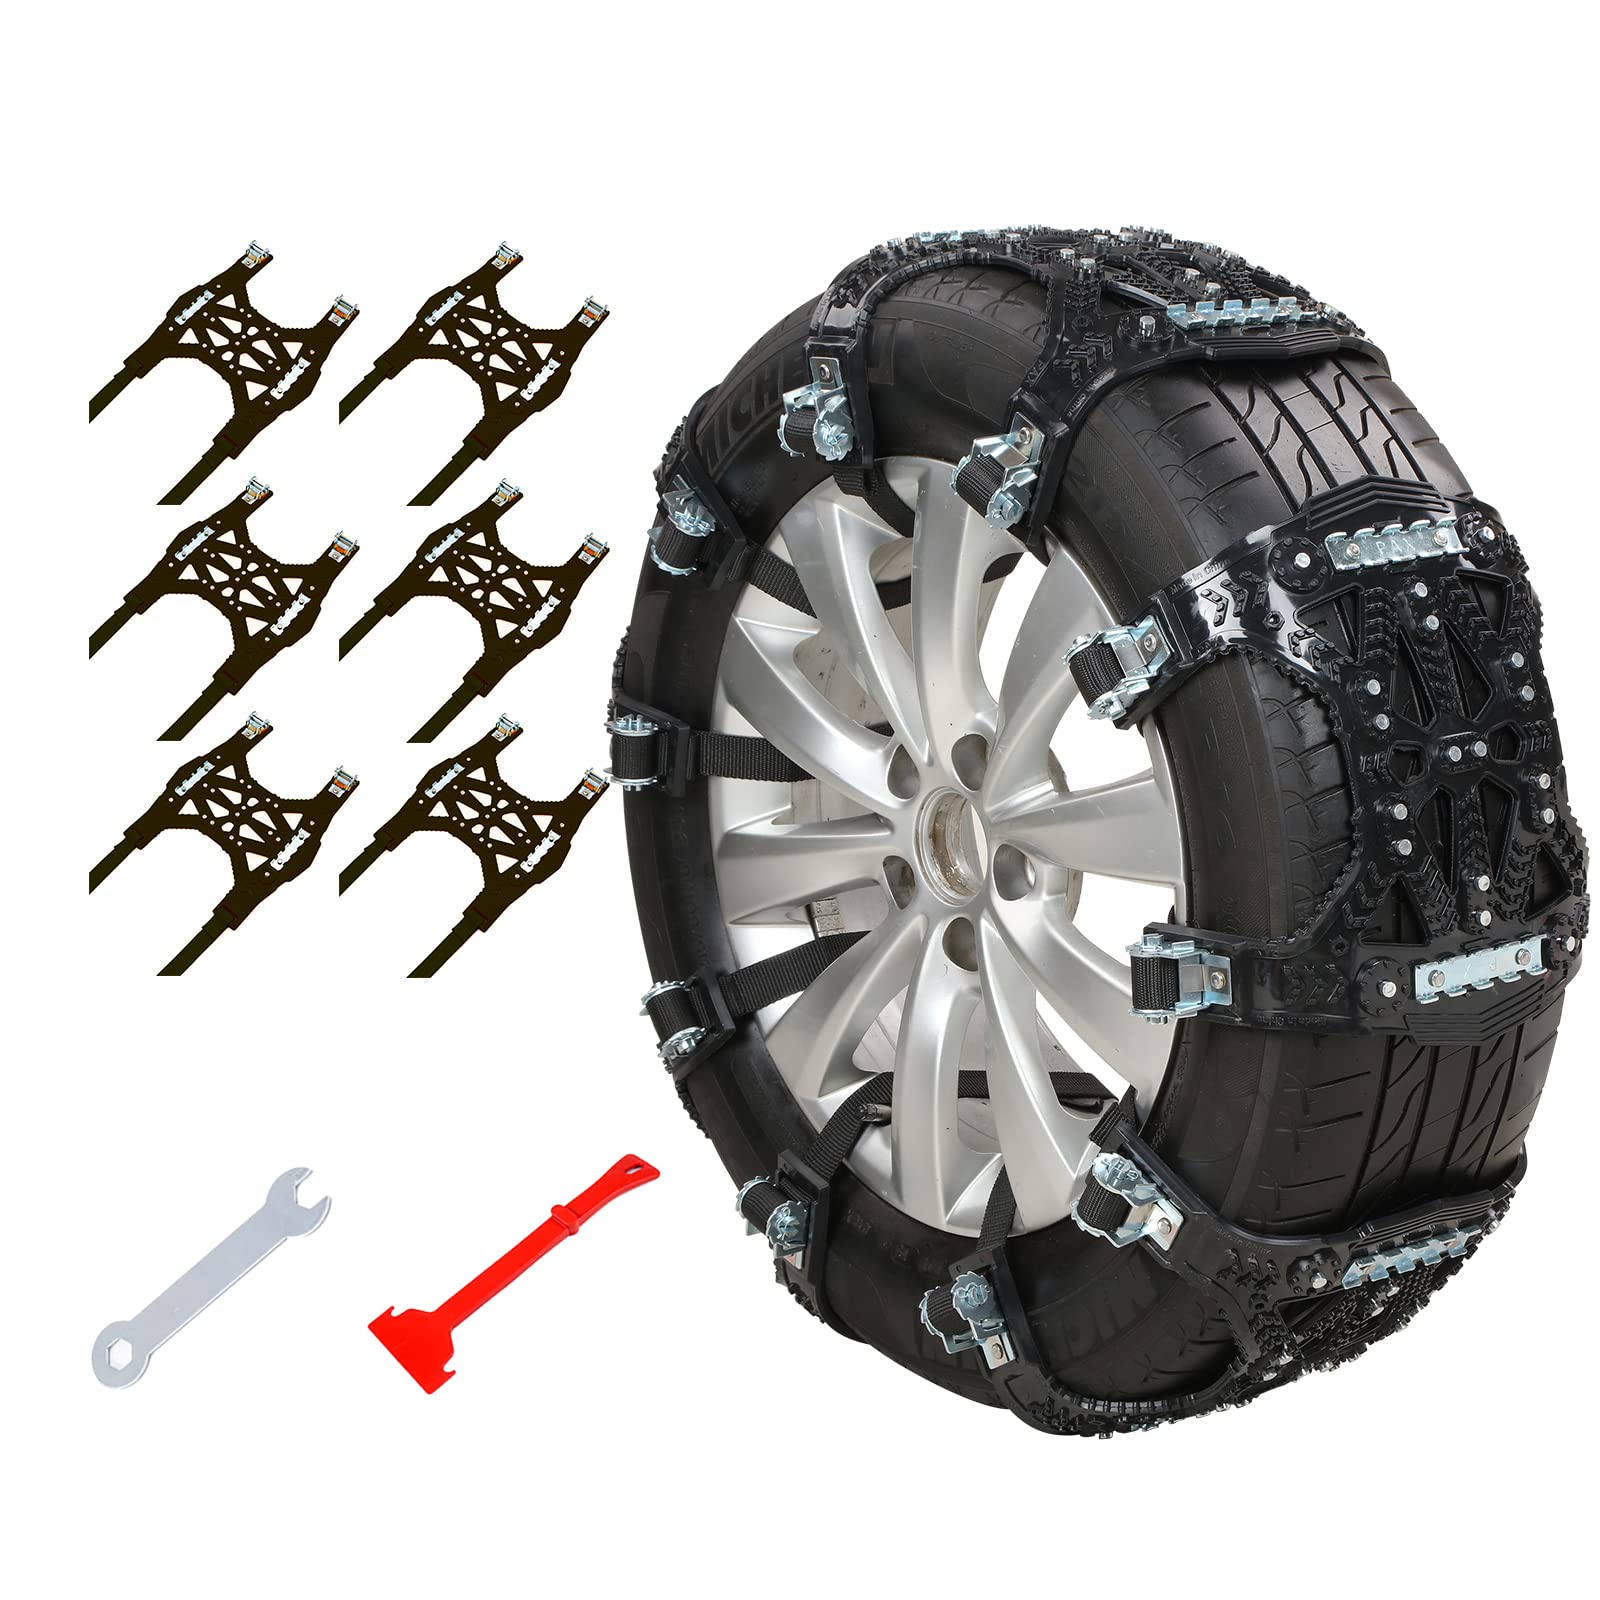 Y-KINZ 6PCS Snow Chains Anti skid Adjustable Tyre Width165-265mm Universal Snow Chains for Car Truck SUV Safety Ice Slush Tire Universal Snow Chain with Plastic Snow Shovel and Wrench von Sonriia